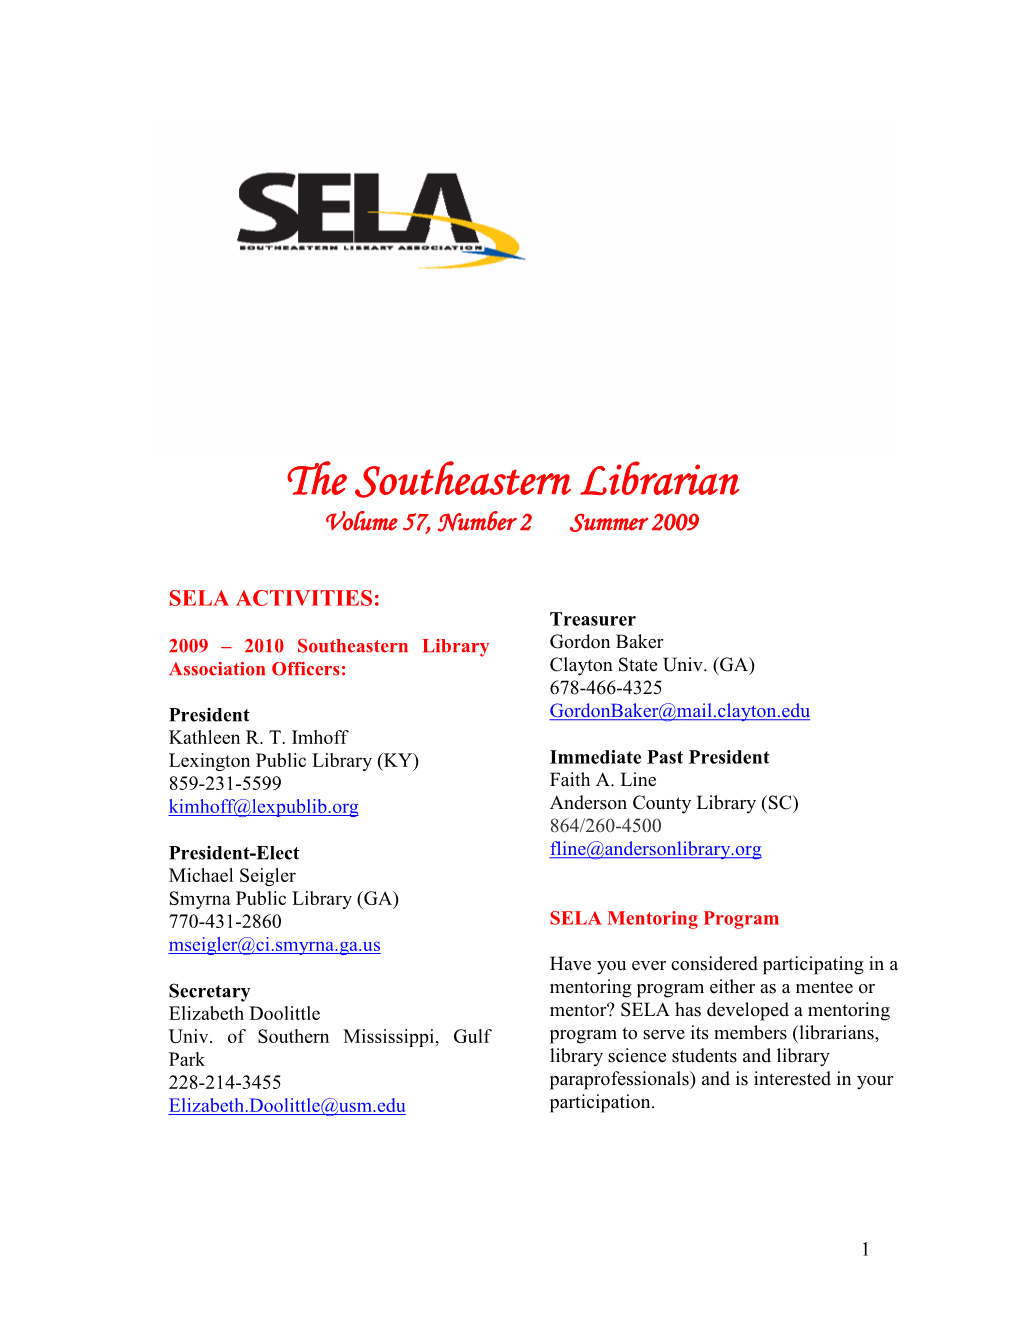 The Southeastern Librarian Volume 57, Number 2 Summer 2009